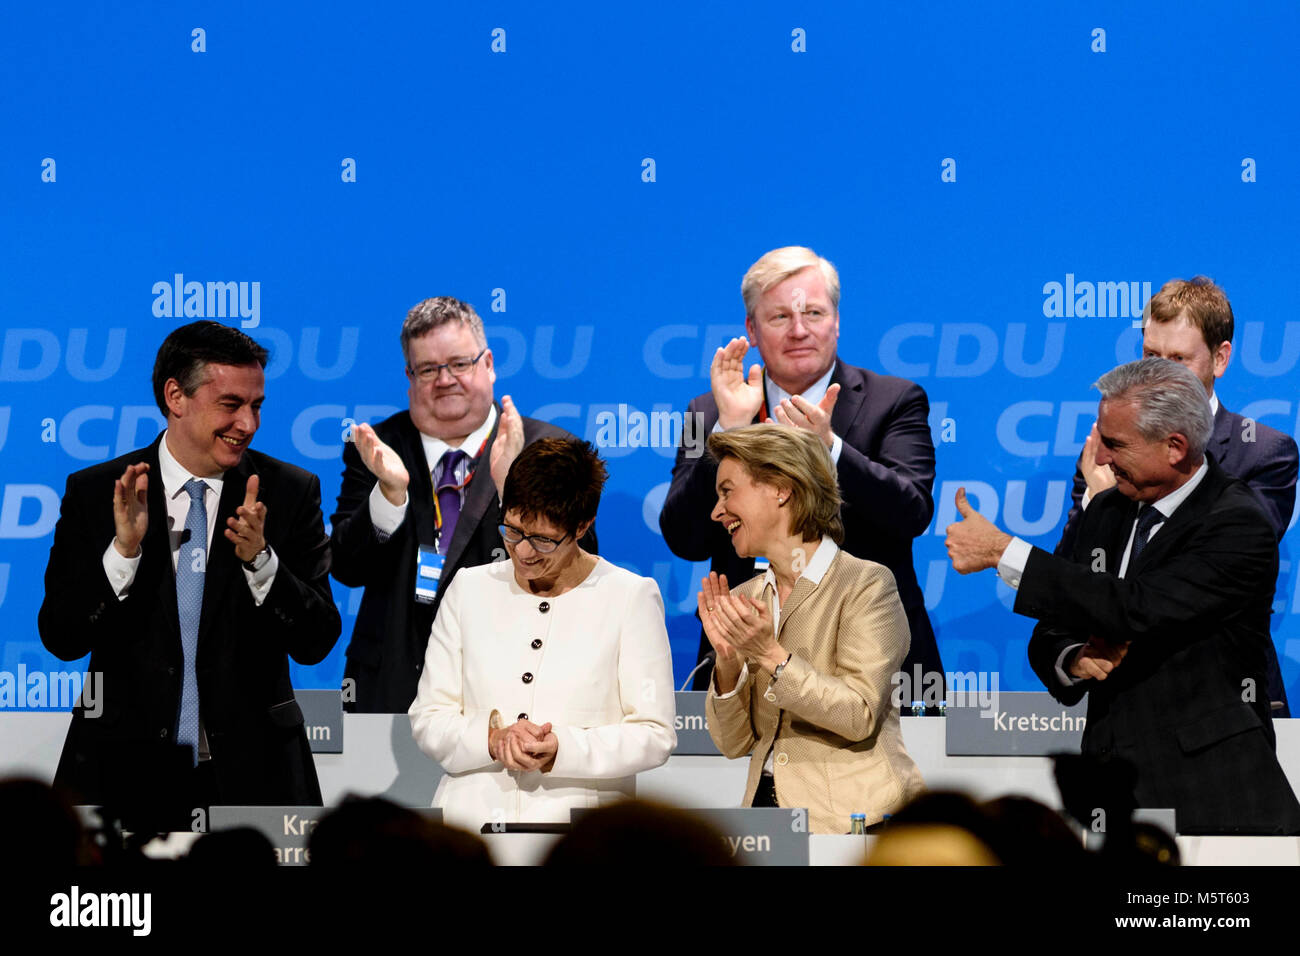 Berlin, Germany. 26th Feb, 2018. CDU members applaud the Annegret Kramp-Karrenbauer (C) during the 30th congress of the CDU. The CDU votes today at the party convention in Berlin on the coalition agreement negotiated with the CSU and the SPD. Credit: 20180226 Heine 30CDUParteitag 1274.jpg/SOPA Images/ZUMA Wire/Alamy Live News Stock Photo